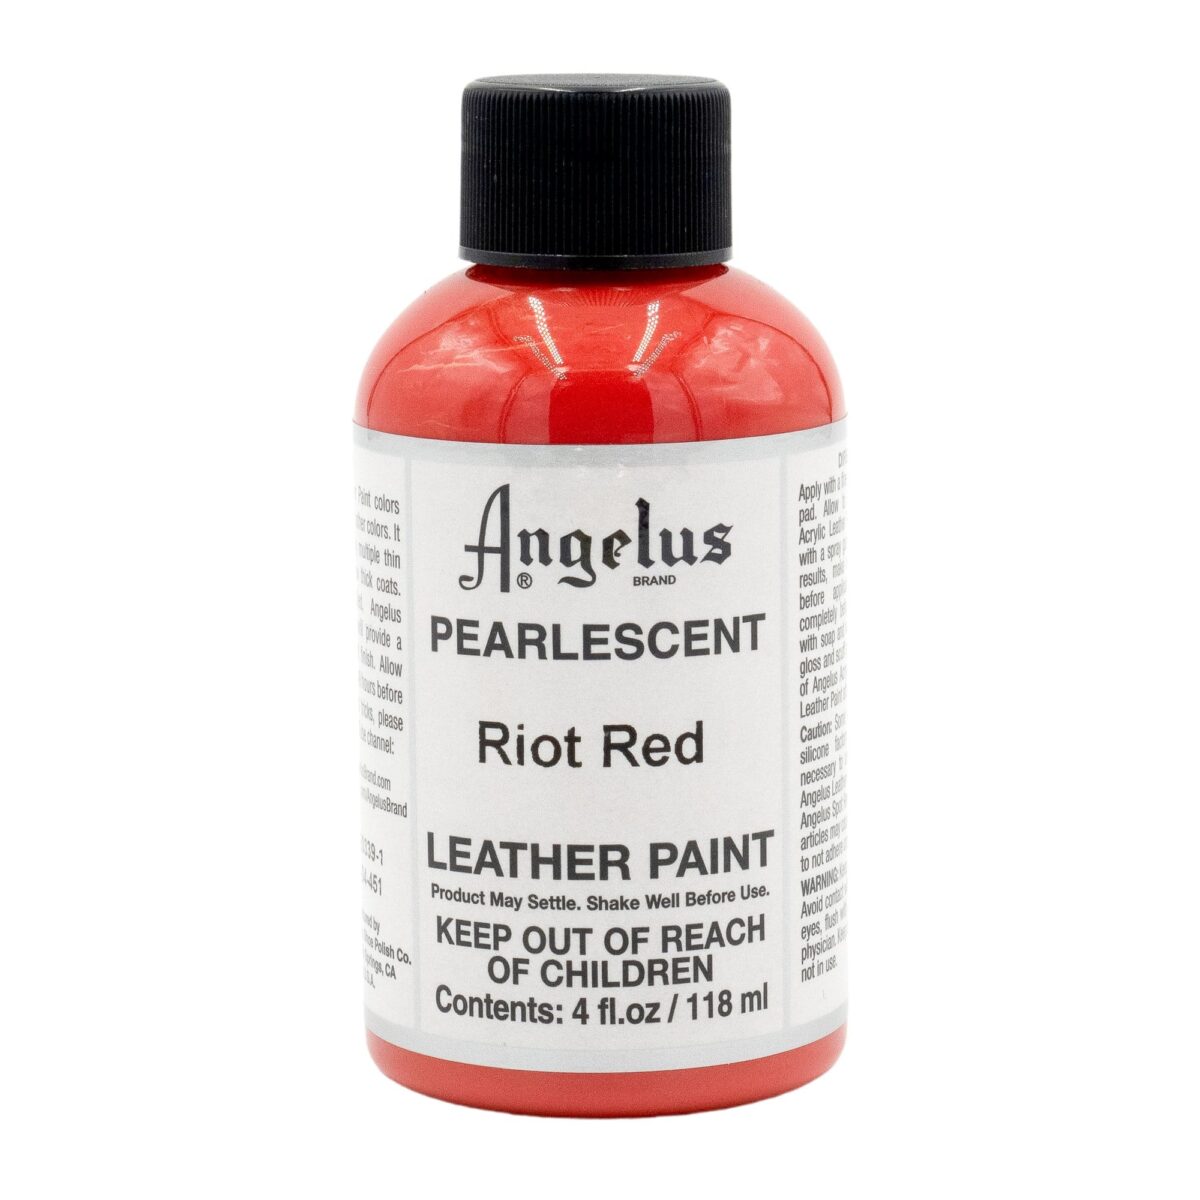 Angelus Leather Paint Pearlescent Riot Red 118ml